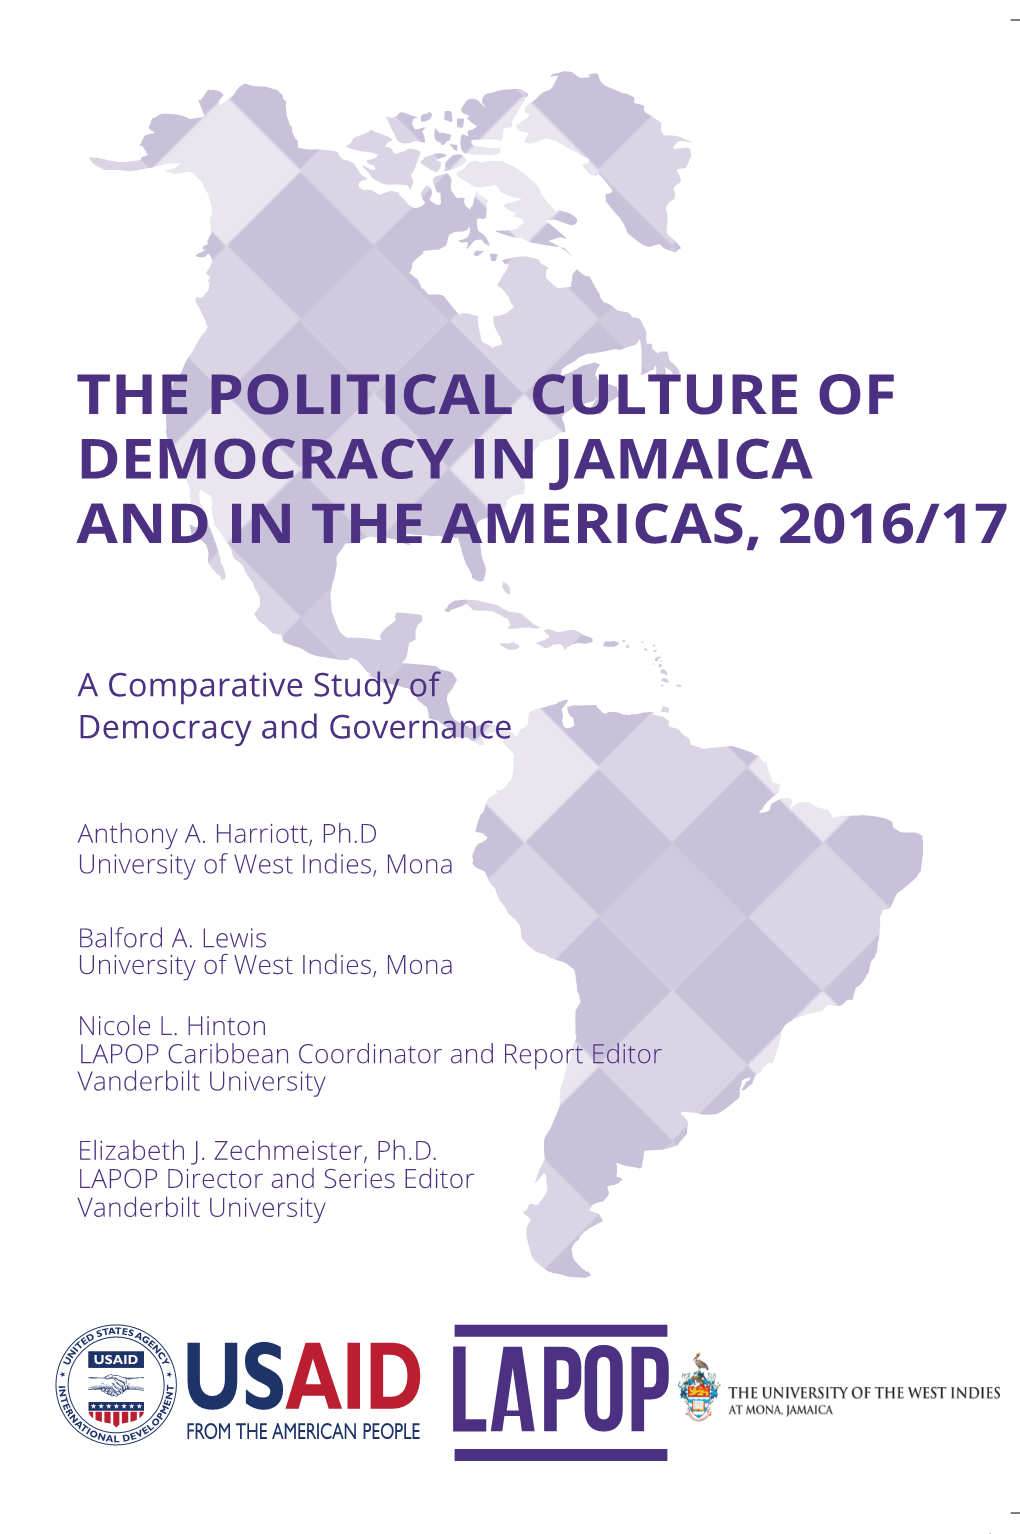 The Political Culture of Democracy in Jamaica and in the Americas, 2016/17: a Comparative Study of Democracy and Governance